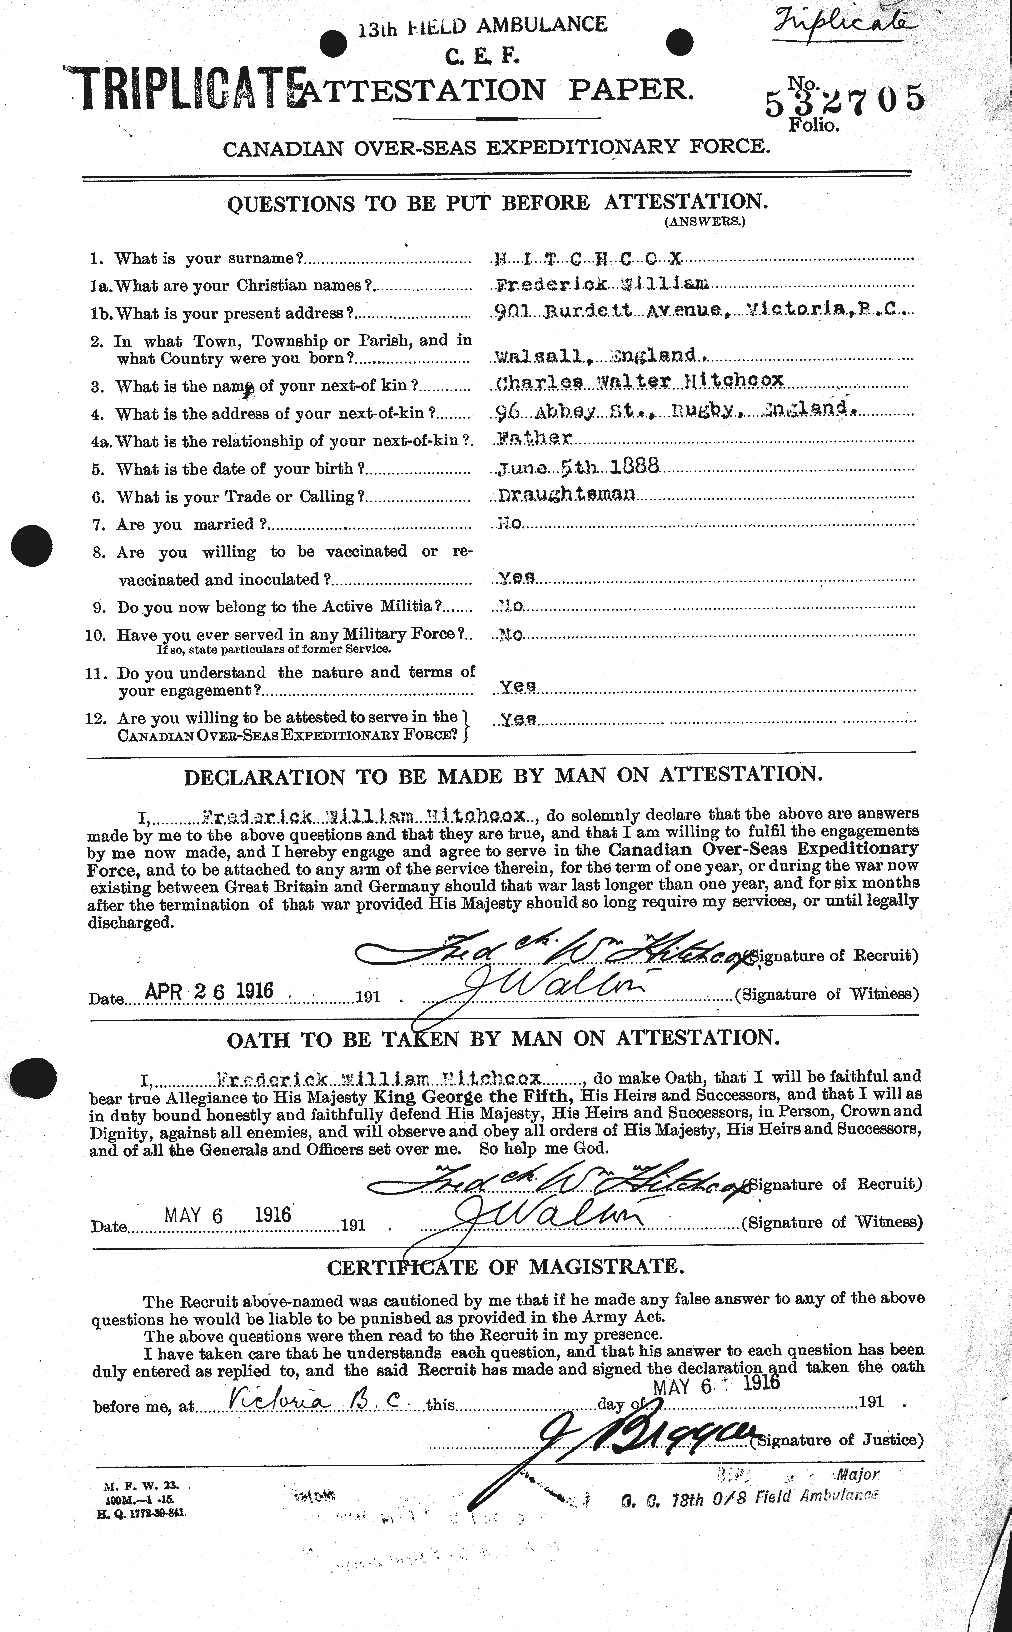 Personnel Records of the First World War - CEF 393045a